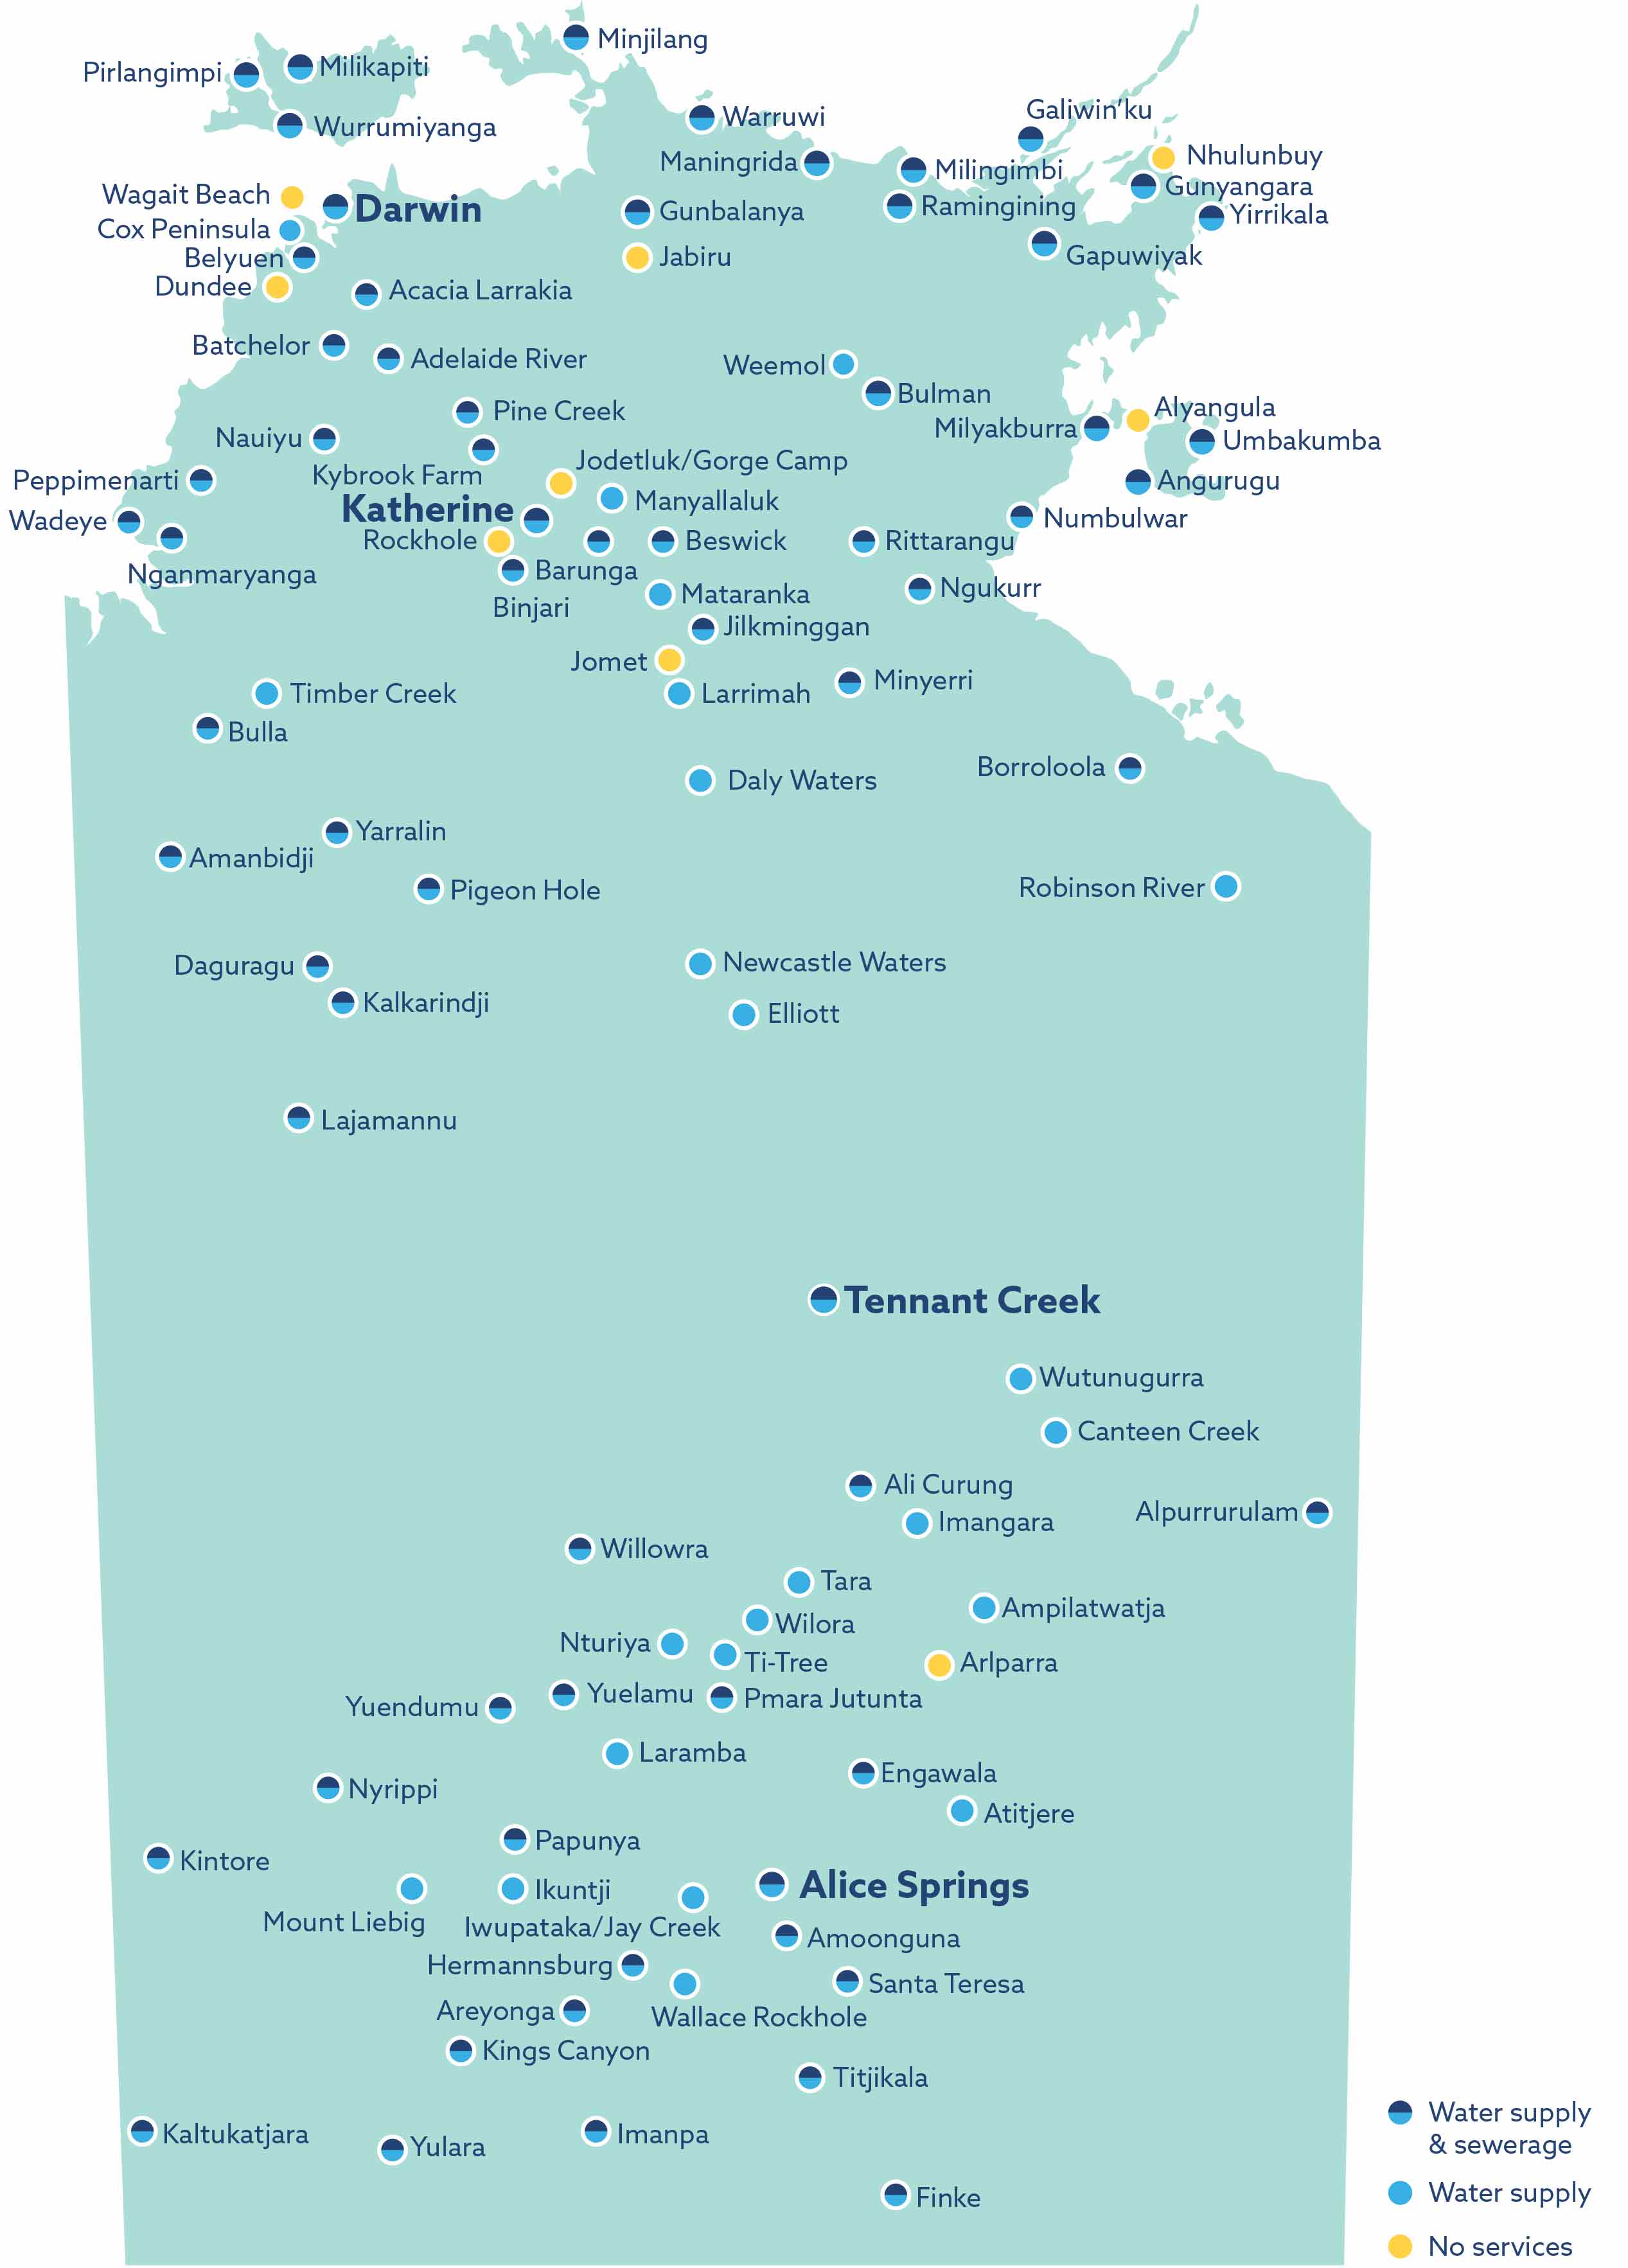 Power Water's image map of Water and Wastewater operations in the Northern Territory  